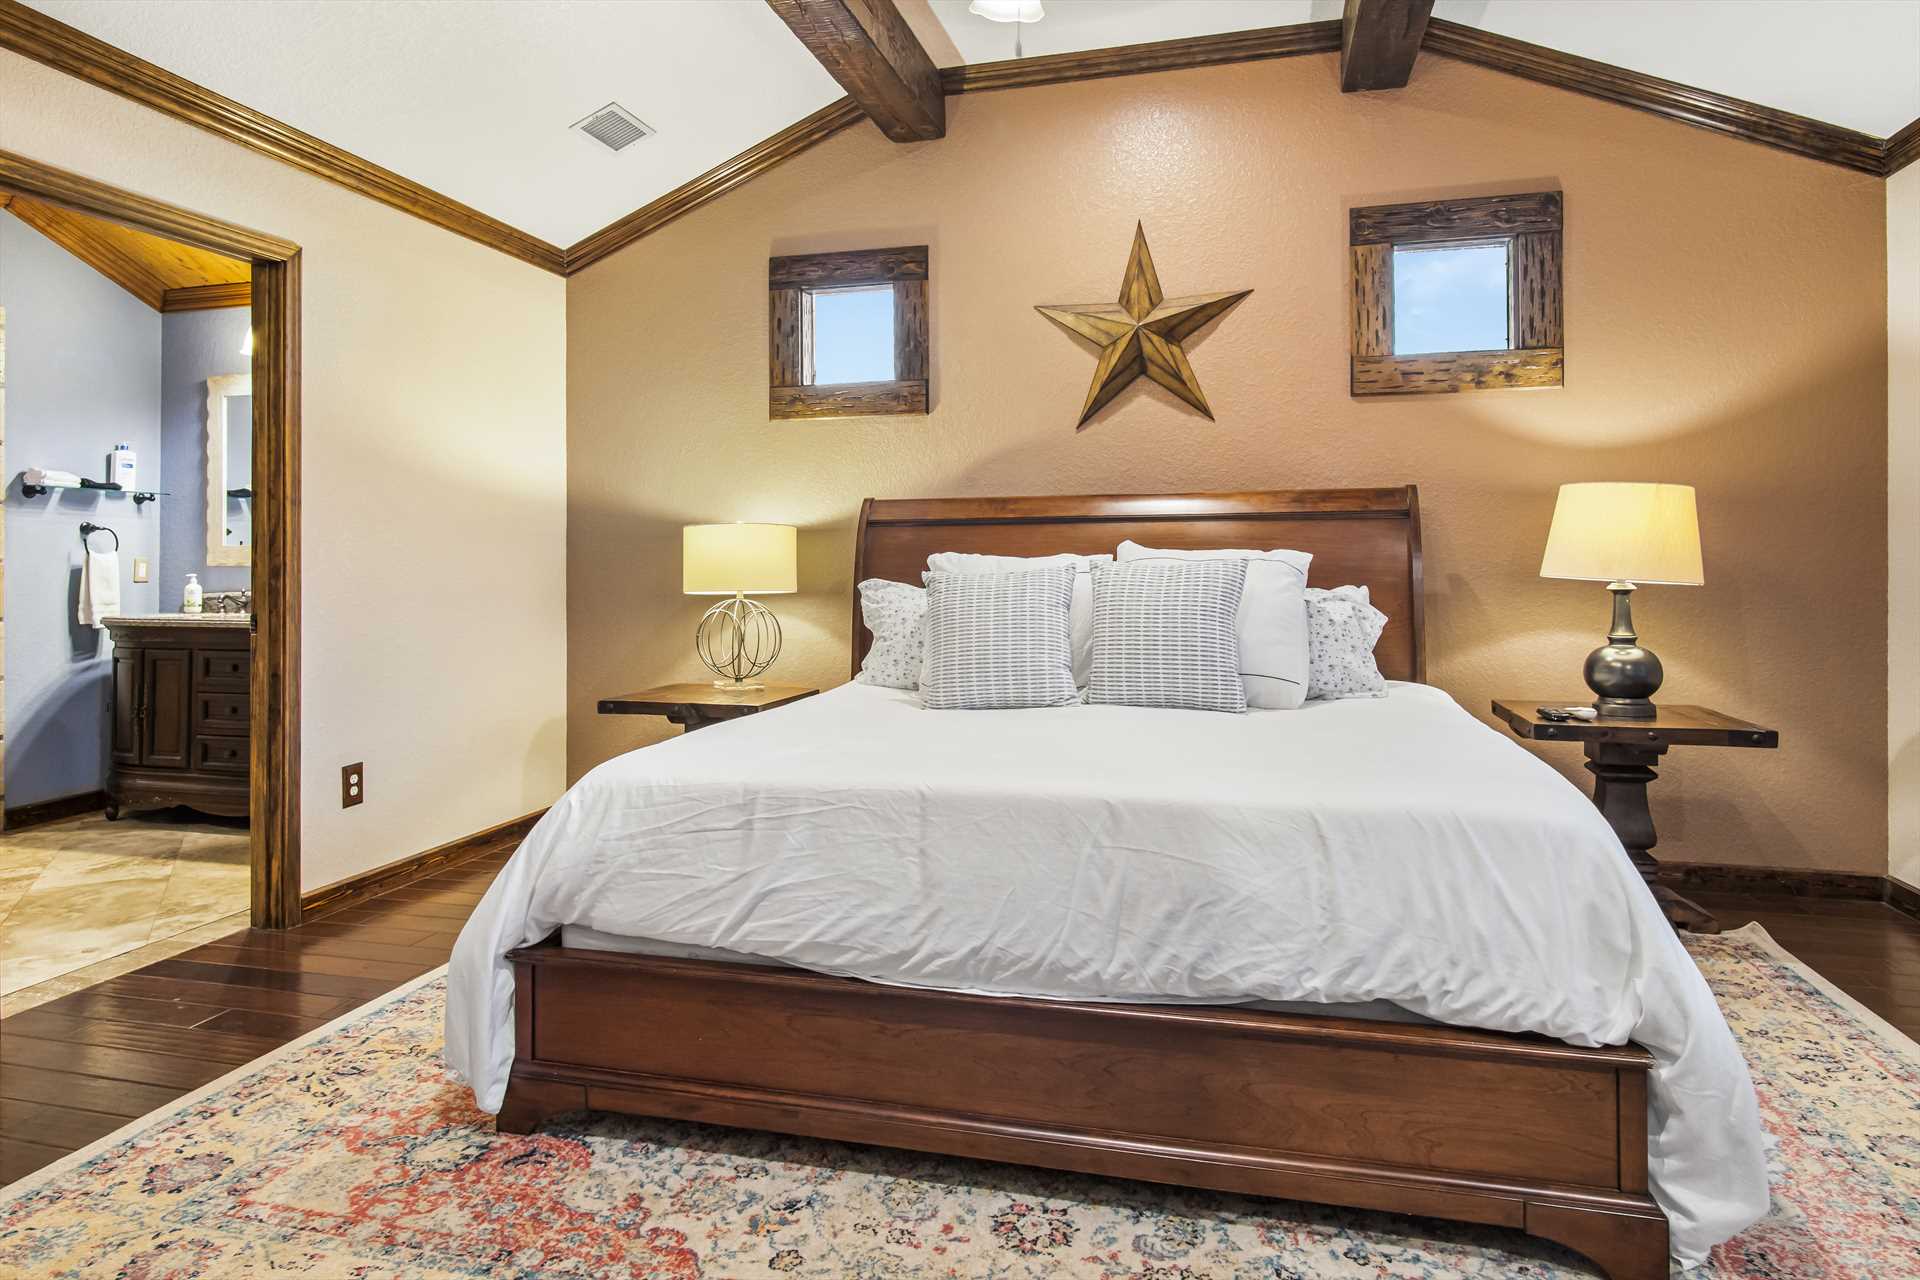                                                 Pampered slumber awaits! Just imagine sinking into those soft pillows on that great big king-sized bed.